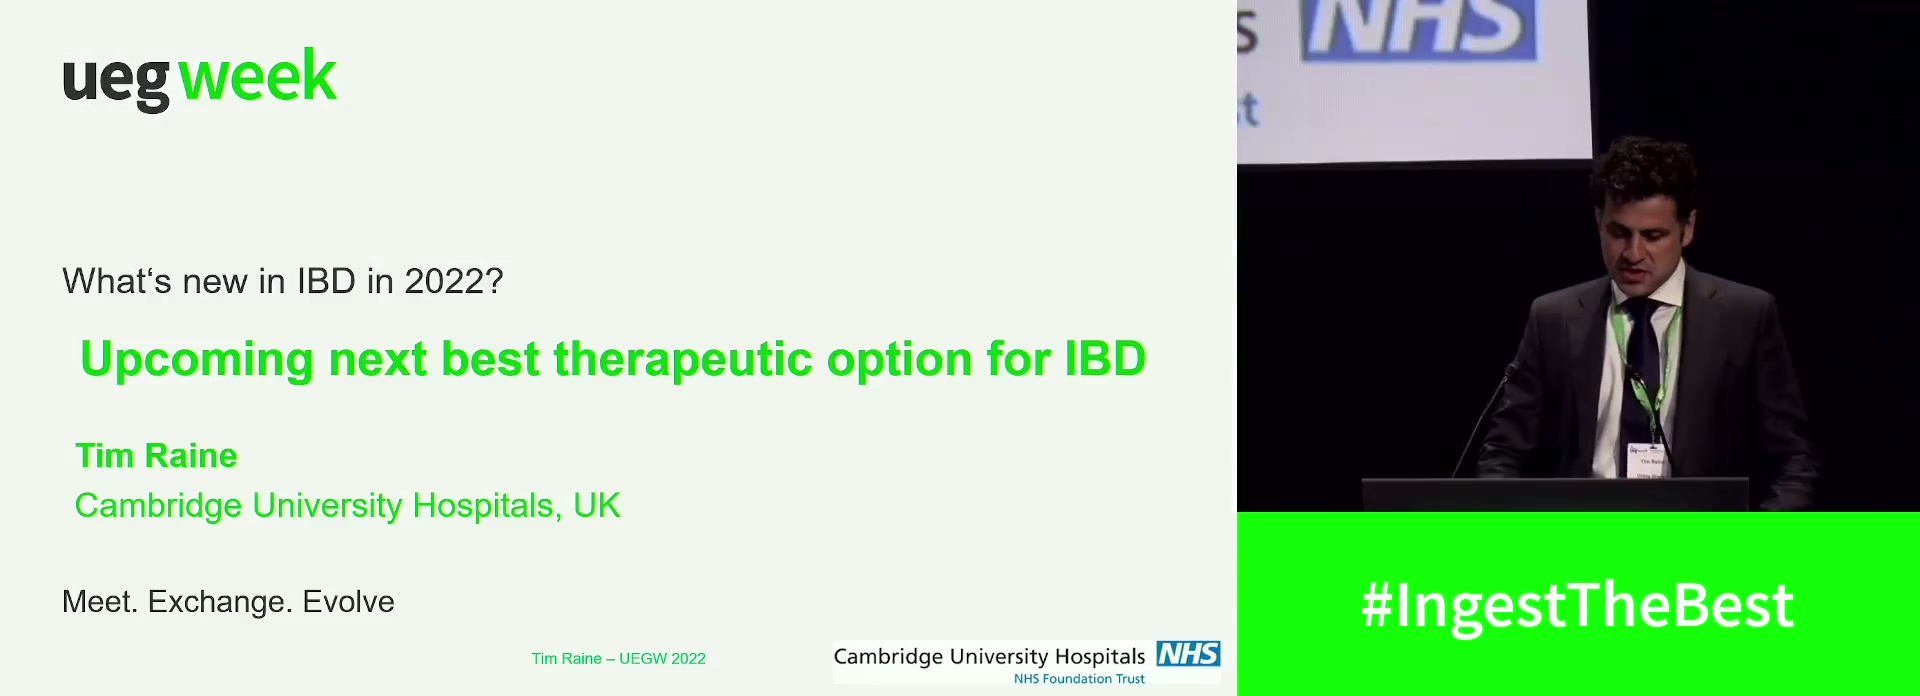 Upcoming next best therapeutic option for IBD